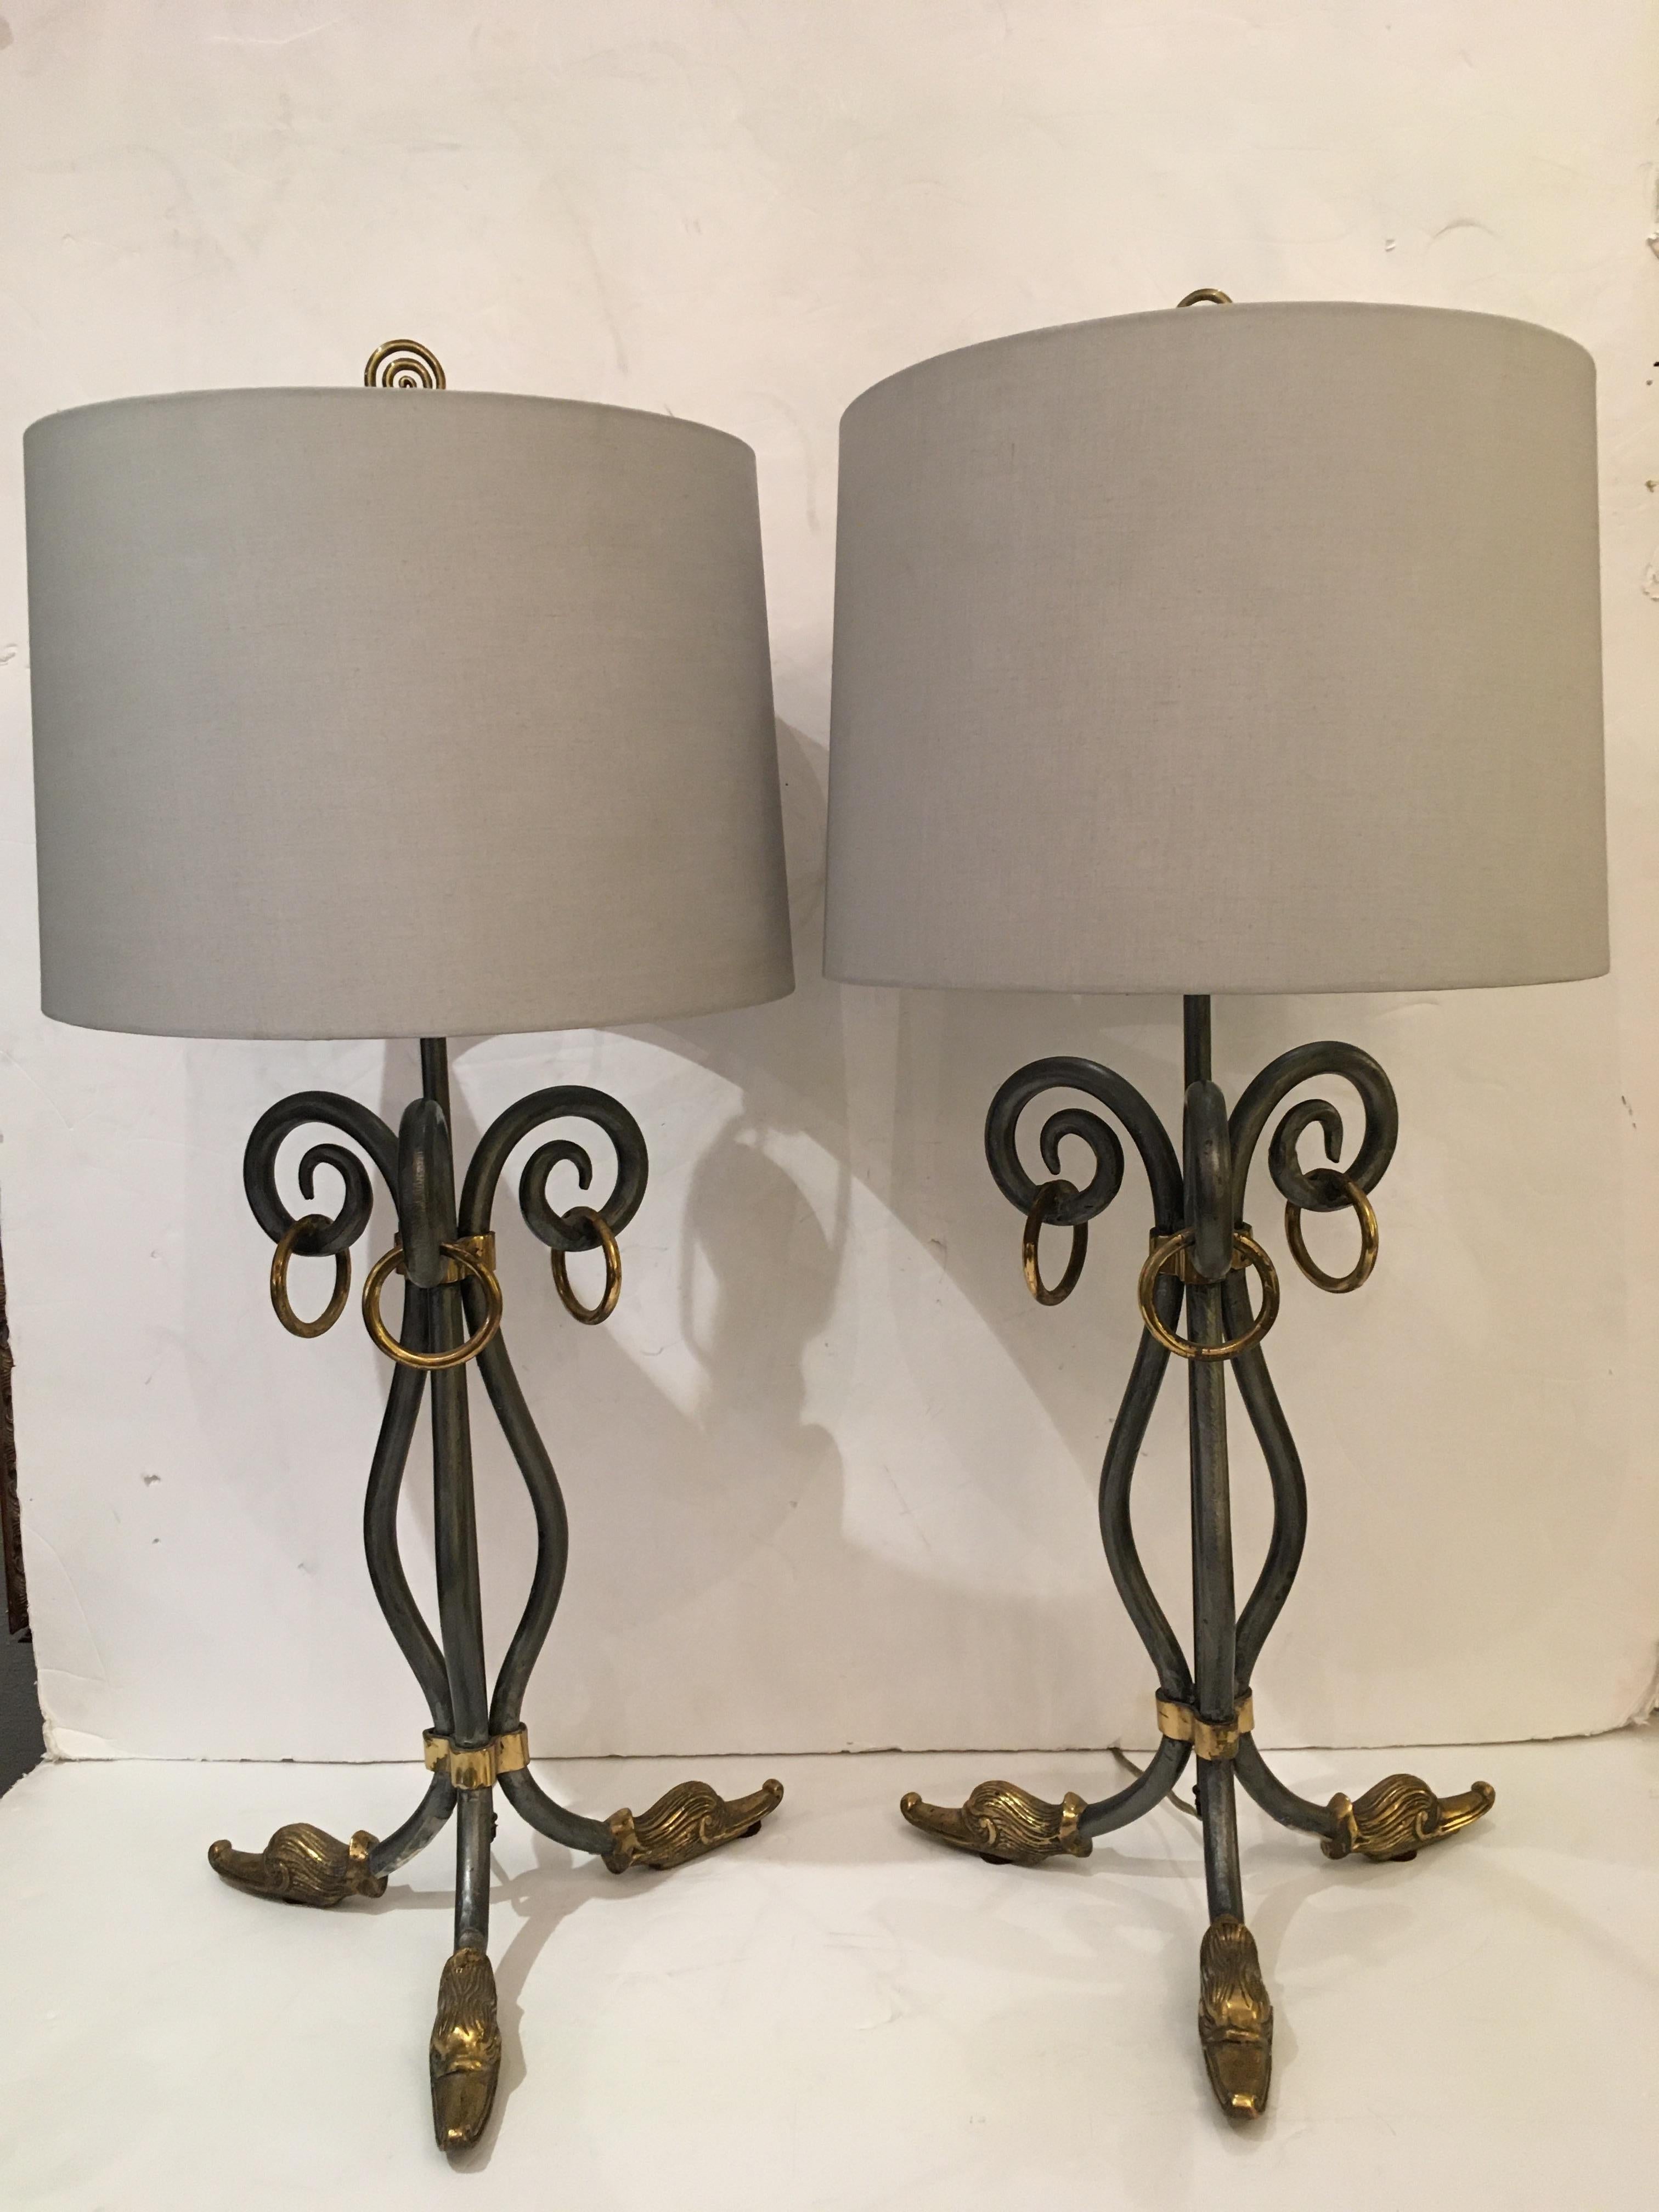 Stylish and fun pair of silver iron table lamps having brass embellishments including fabulous duck feet and ring handles. The spiral finals add a finishing touch.